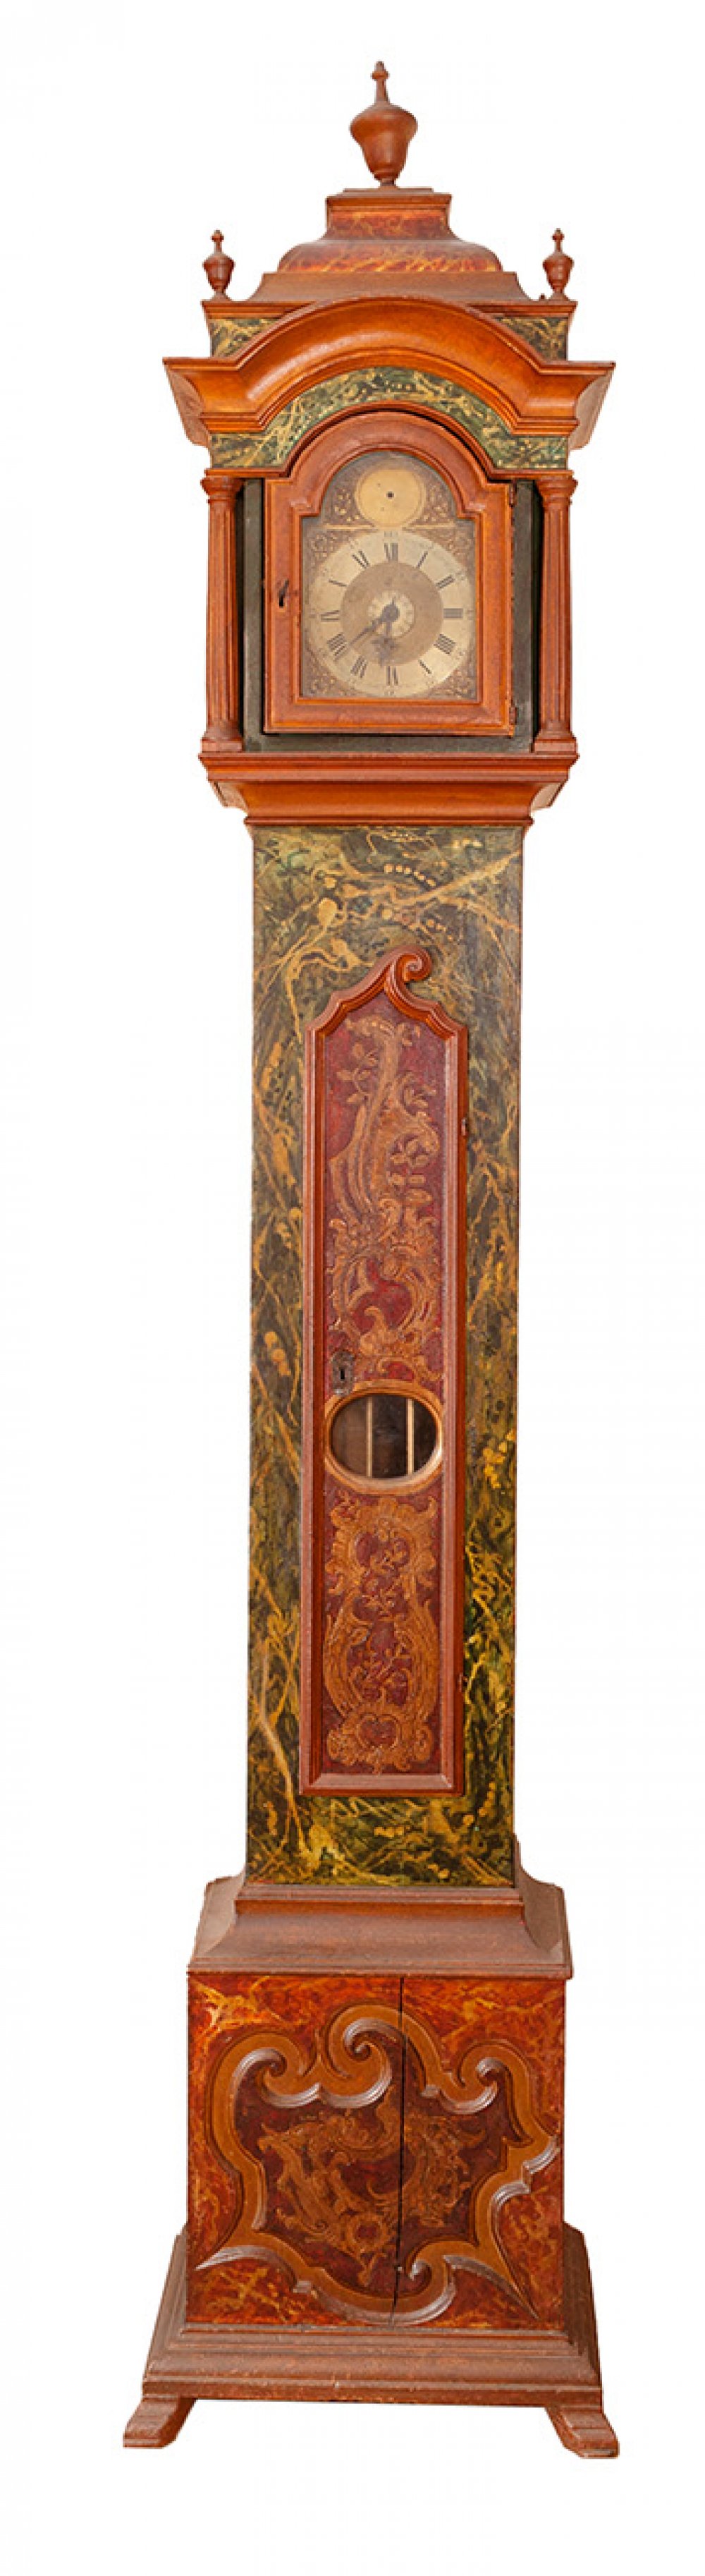 English style grandfather clock, 19th century.Polychrome wood.Requires restoration. On top of the